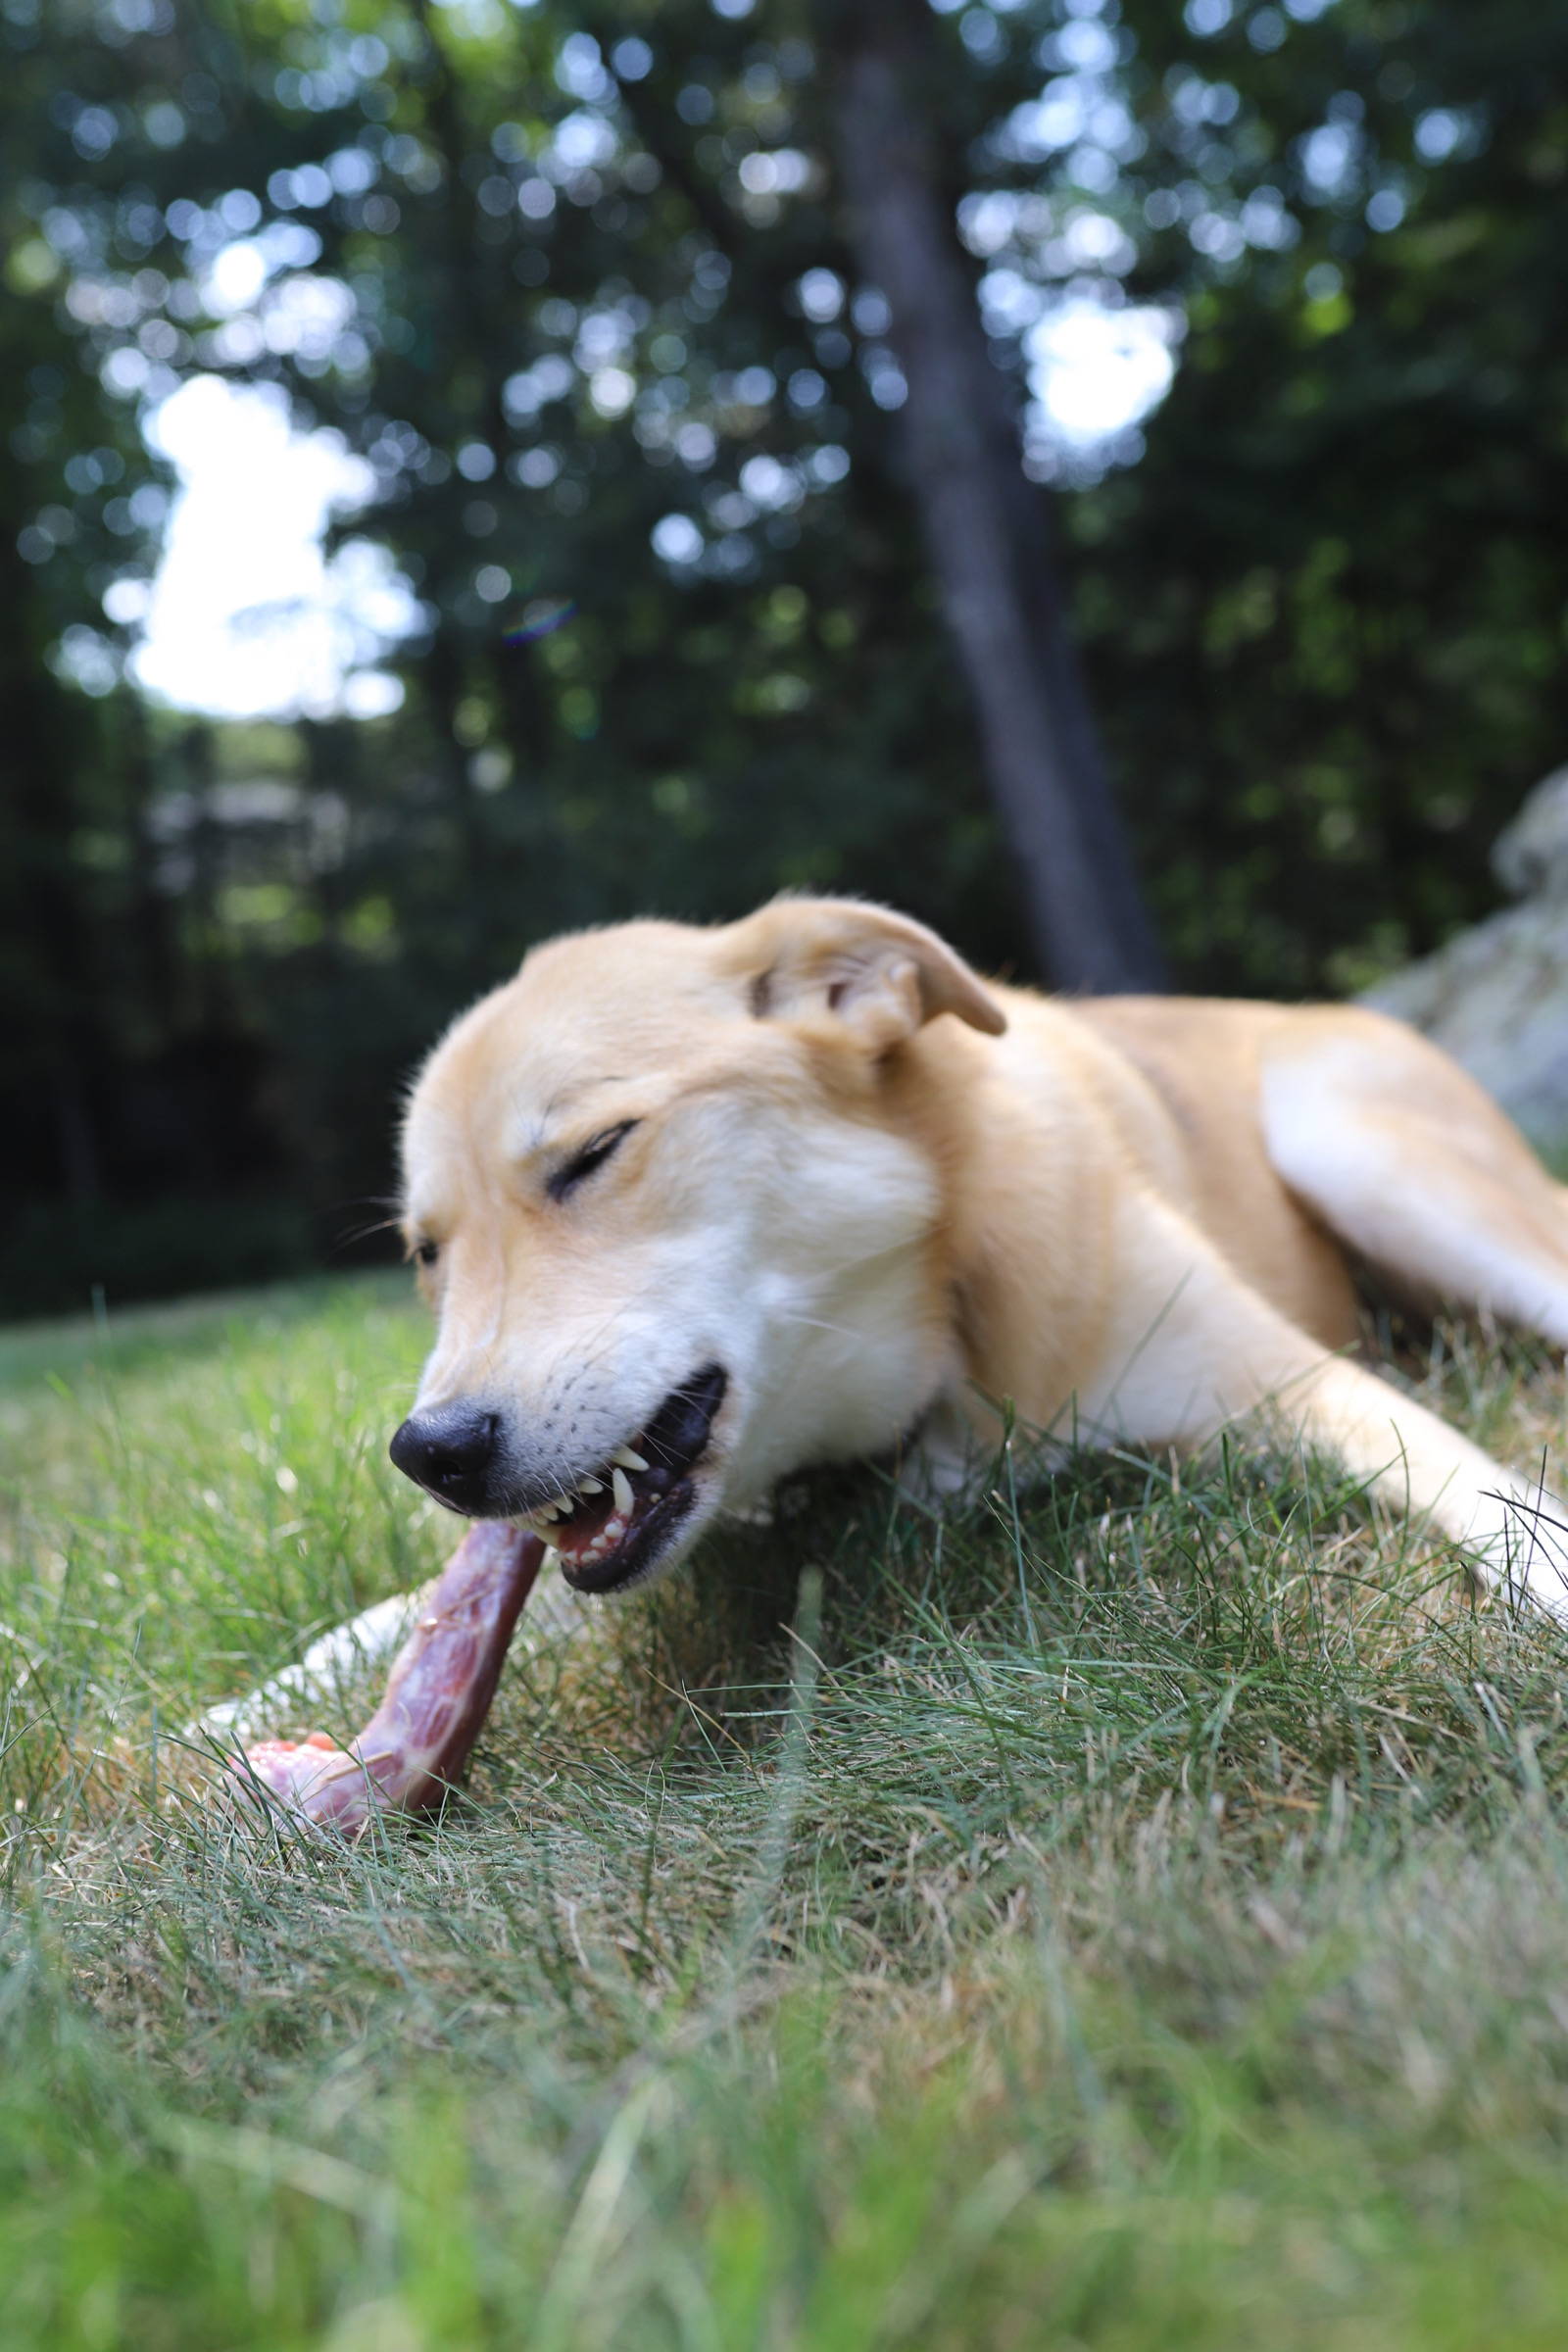 Yellow puppy laying on grass chewing on a raw bone with eyes closed.